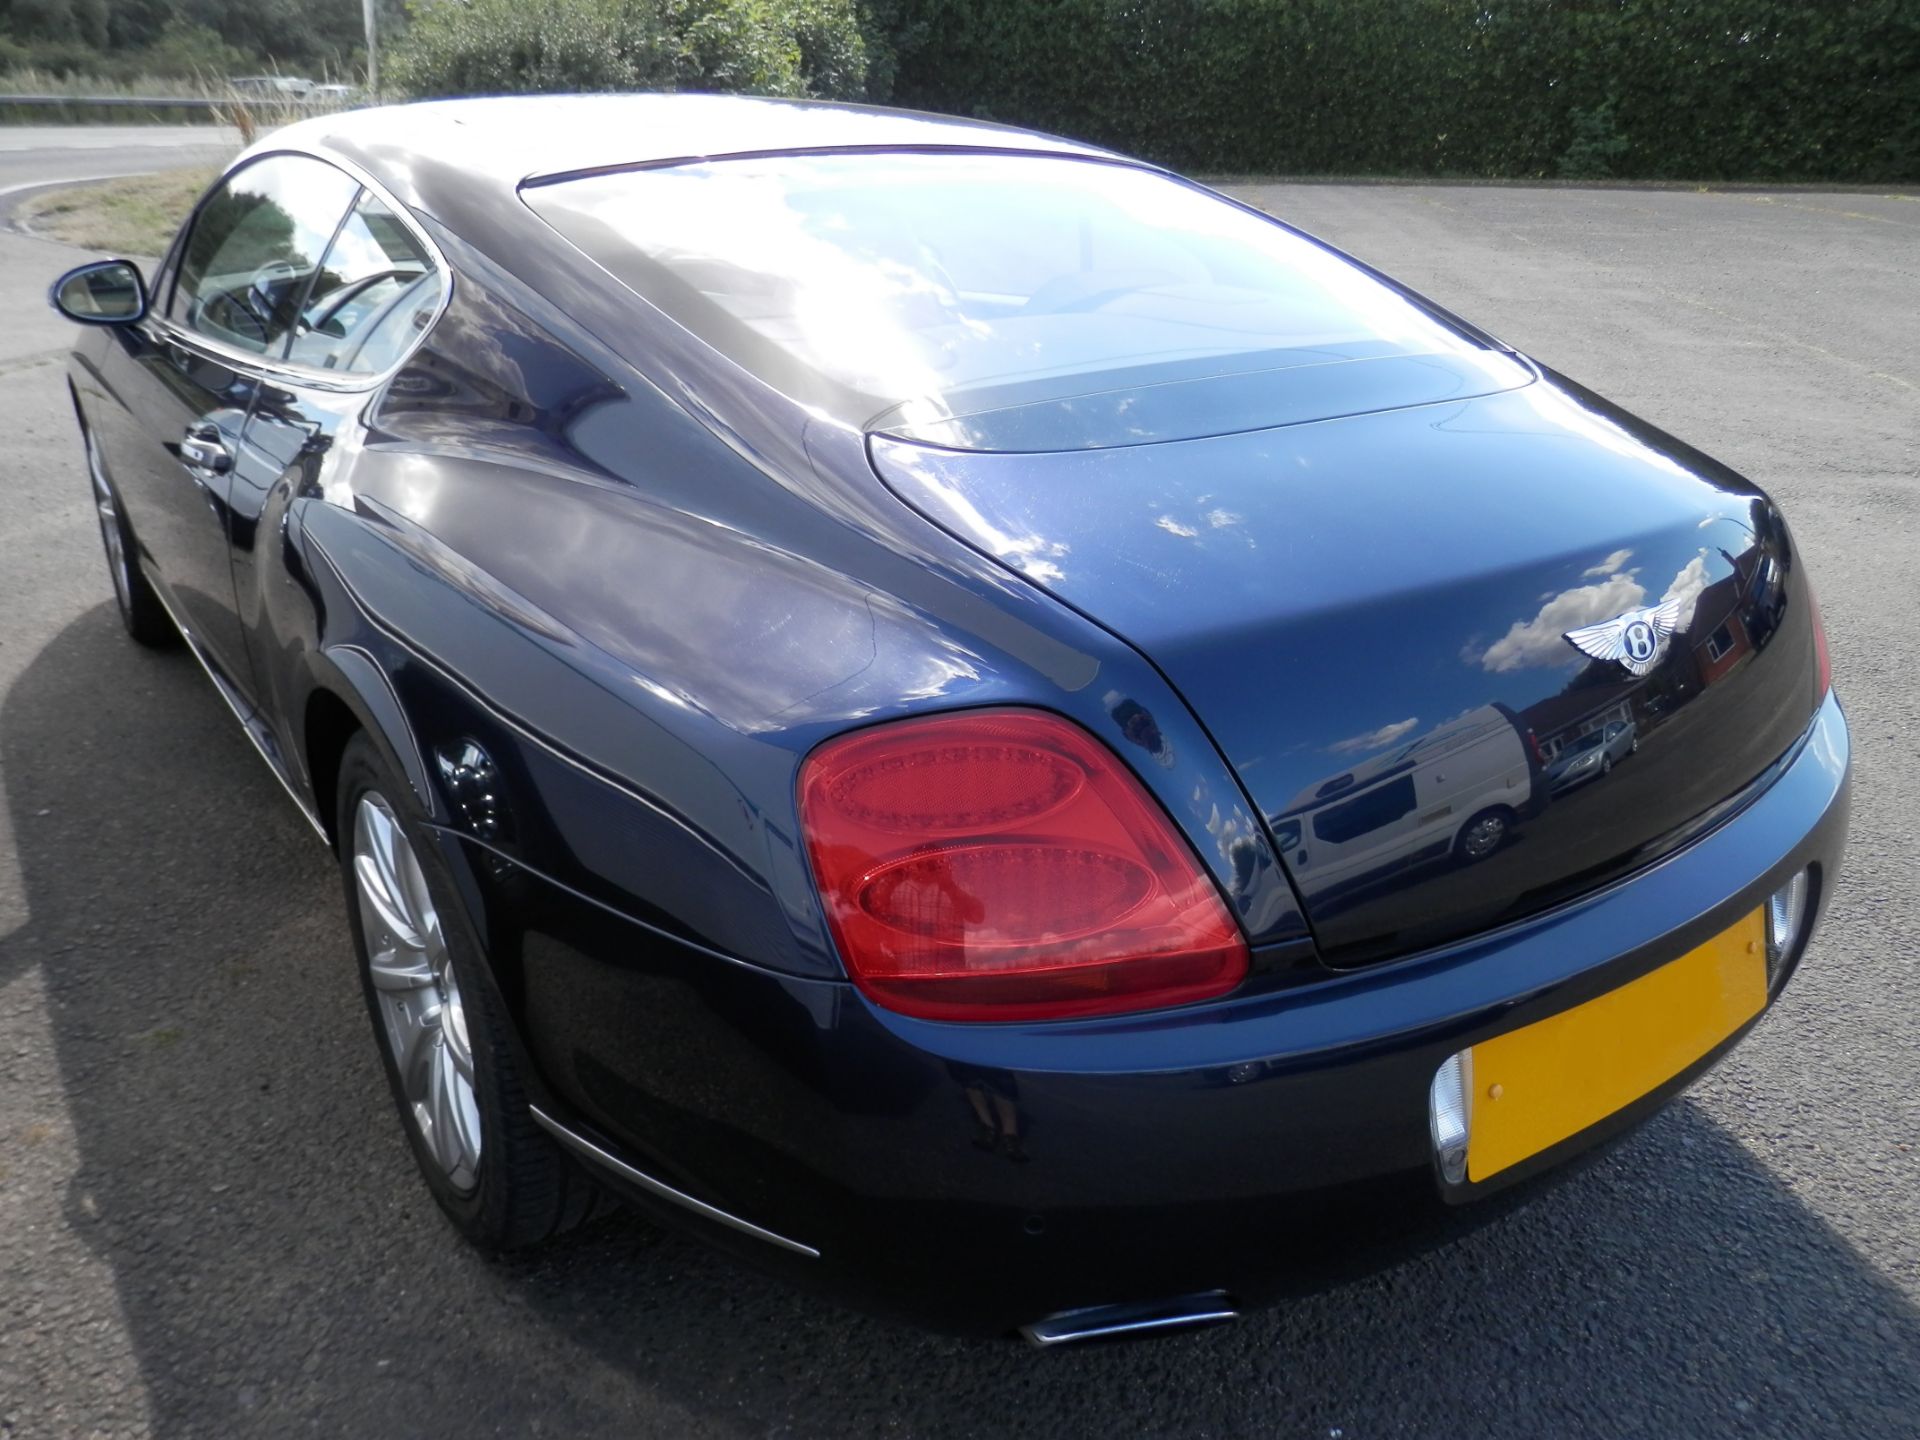 STUNNING 2007 BENTLEY GT CONTINENTAL, 6.0L TWIN TURBO,35K MILES, BLUE, CREAM LEATHER, FULL HISTORY. - Image 4 of 53